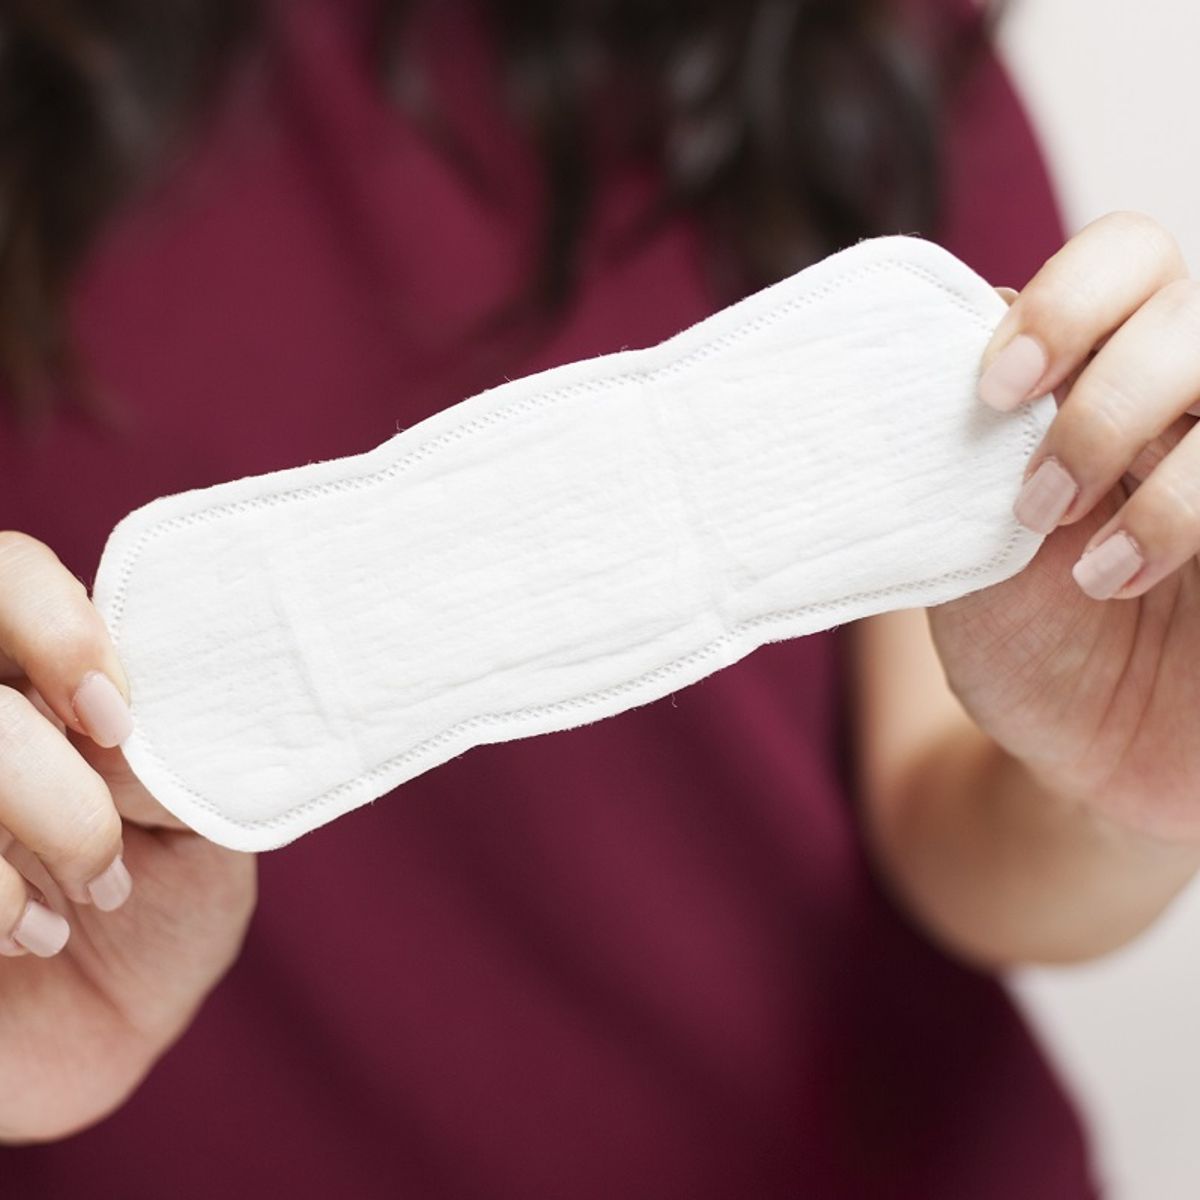 Indonesian teenagers are boiling sanitary pads to get high, officials warn